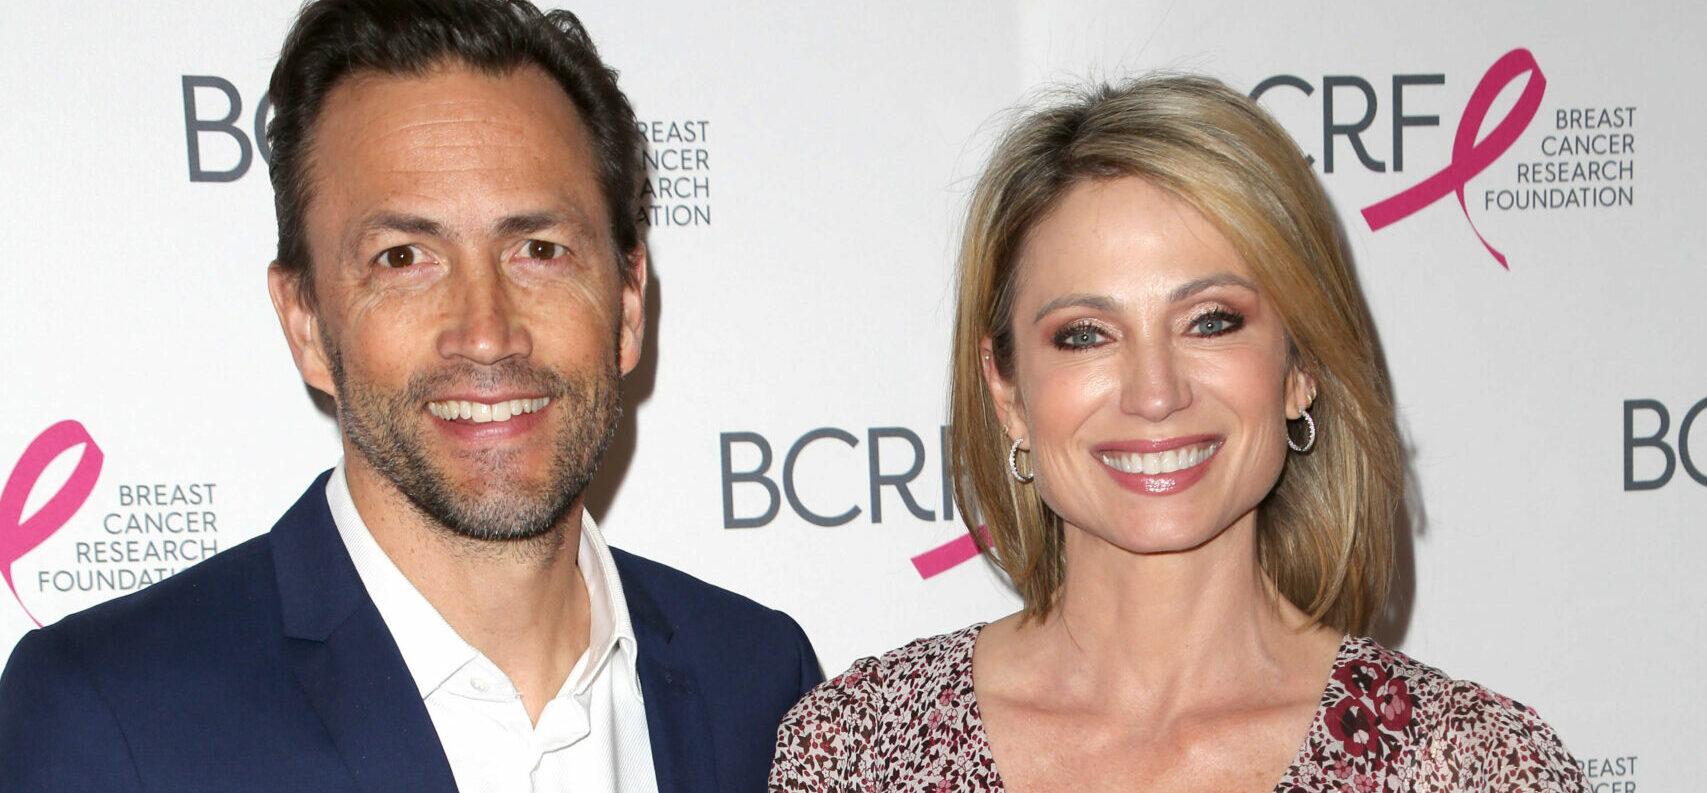 Breast Cancer Research Foundation Symposium and Awards Luncheon, The New York Hilton Midtown, NYC. 25 Oct 2018 Pictured: ANDREW SHUE, AMY ROBACH attend the Breast Cancer Research Foundation Symposium and Awards Luncheon